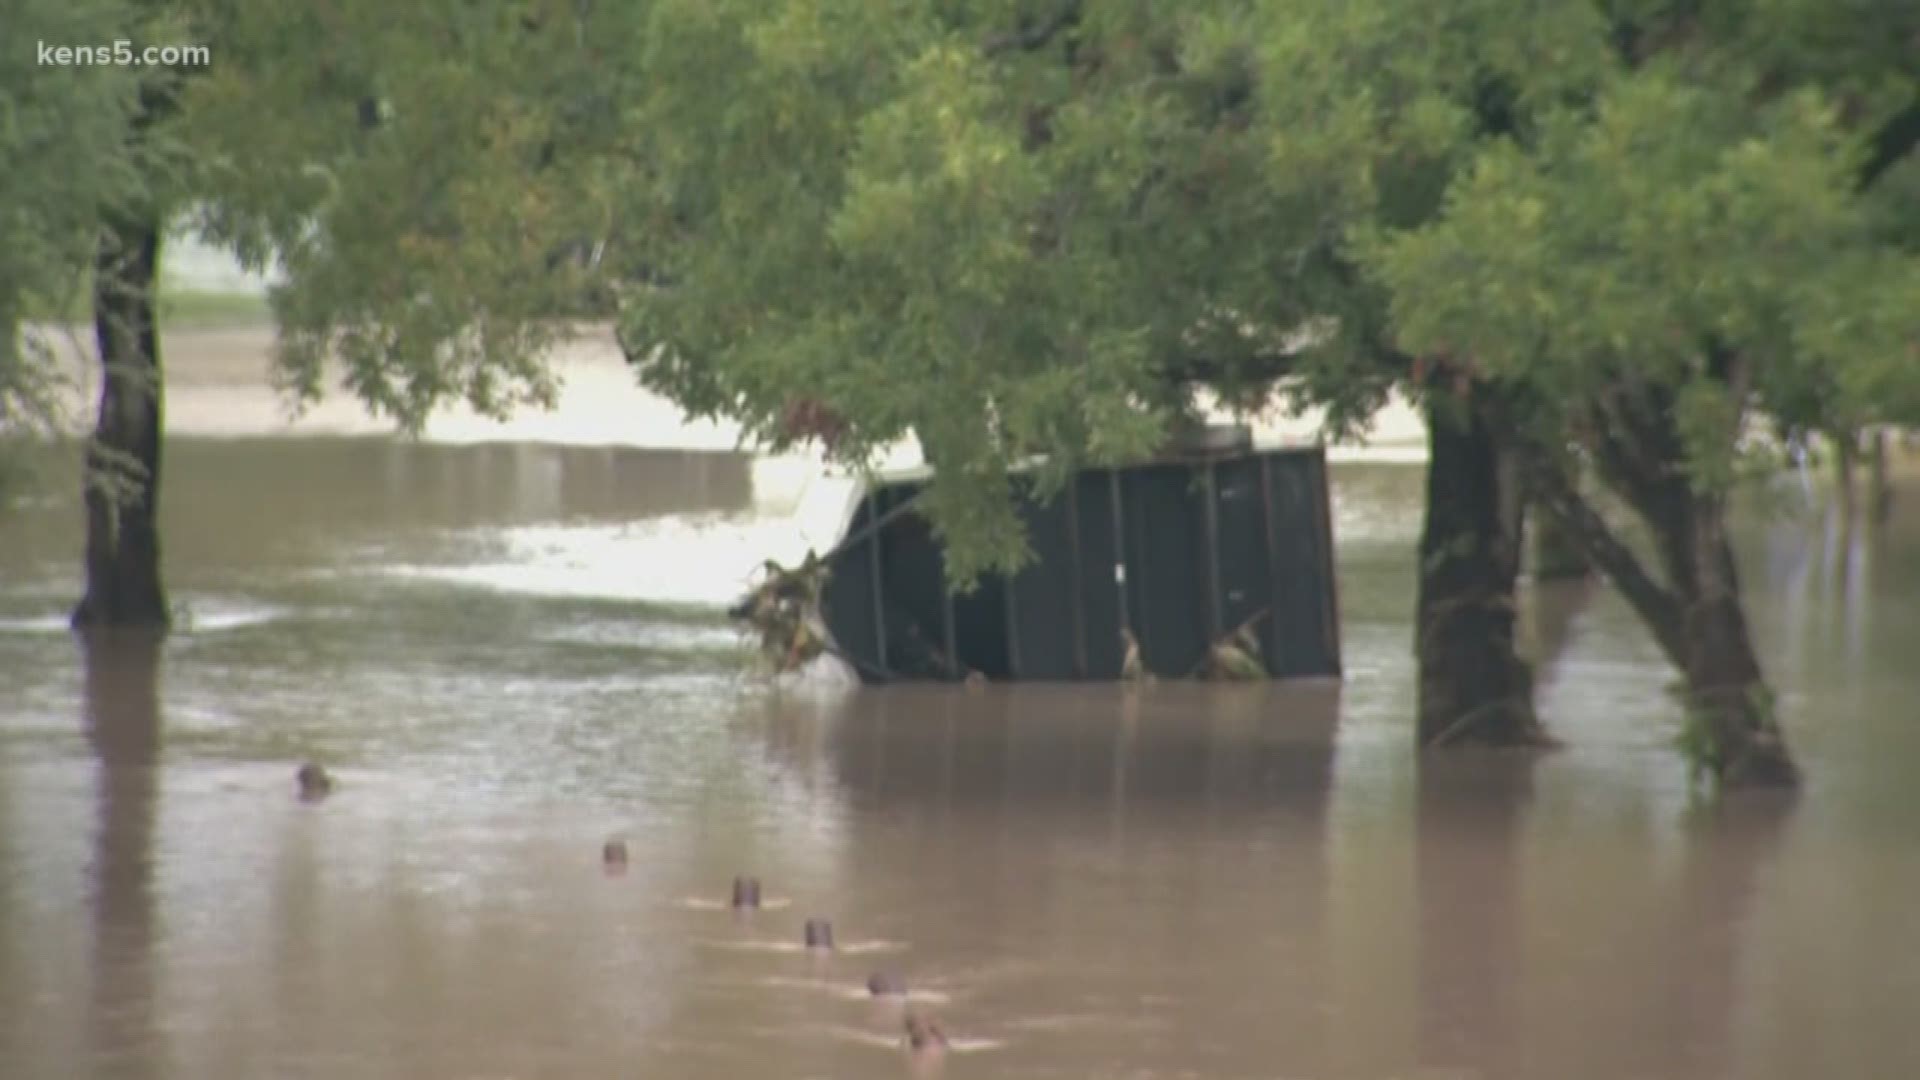 One woman survived by clinging to flood debris as she was swept down the river.